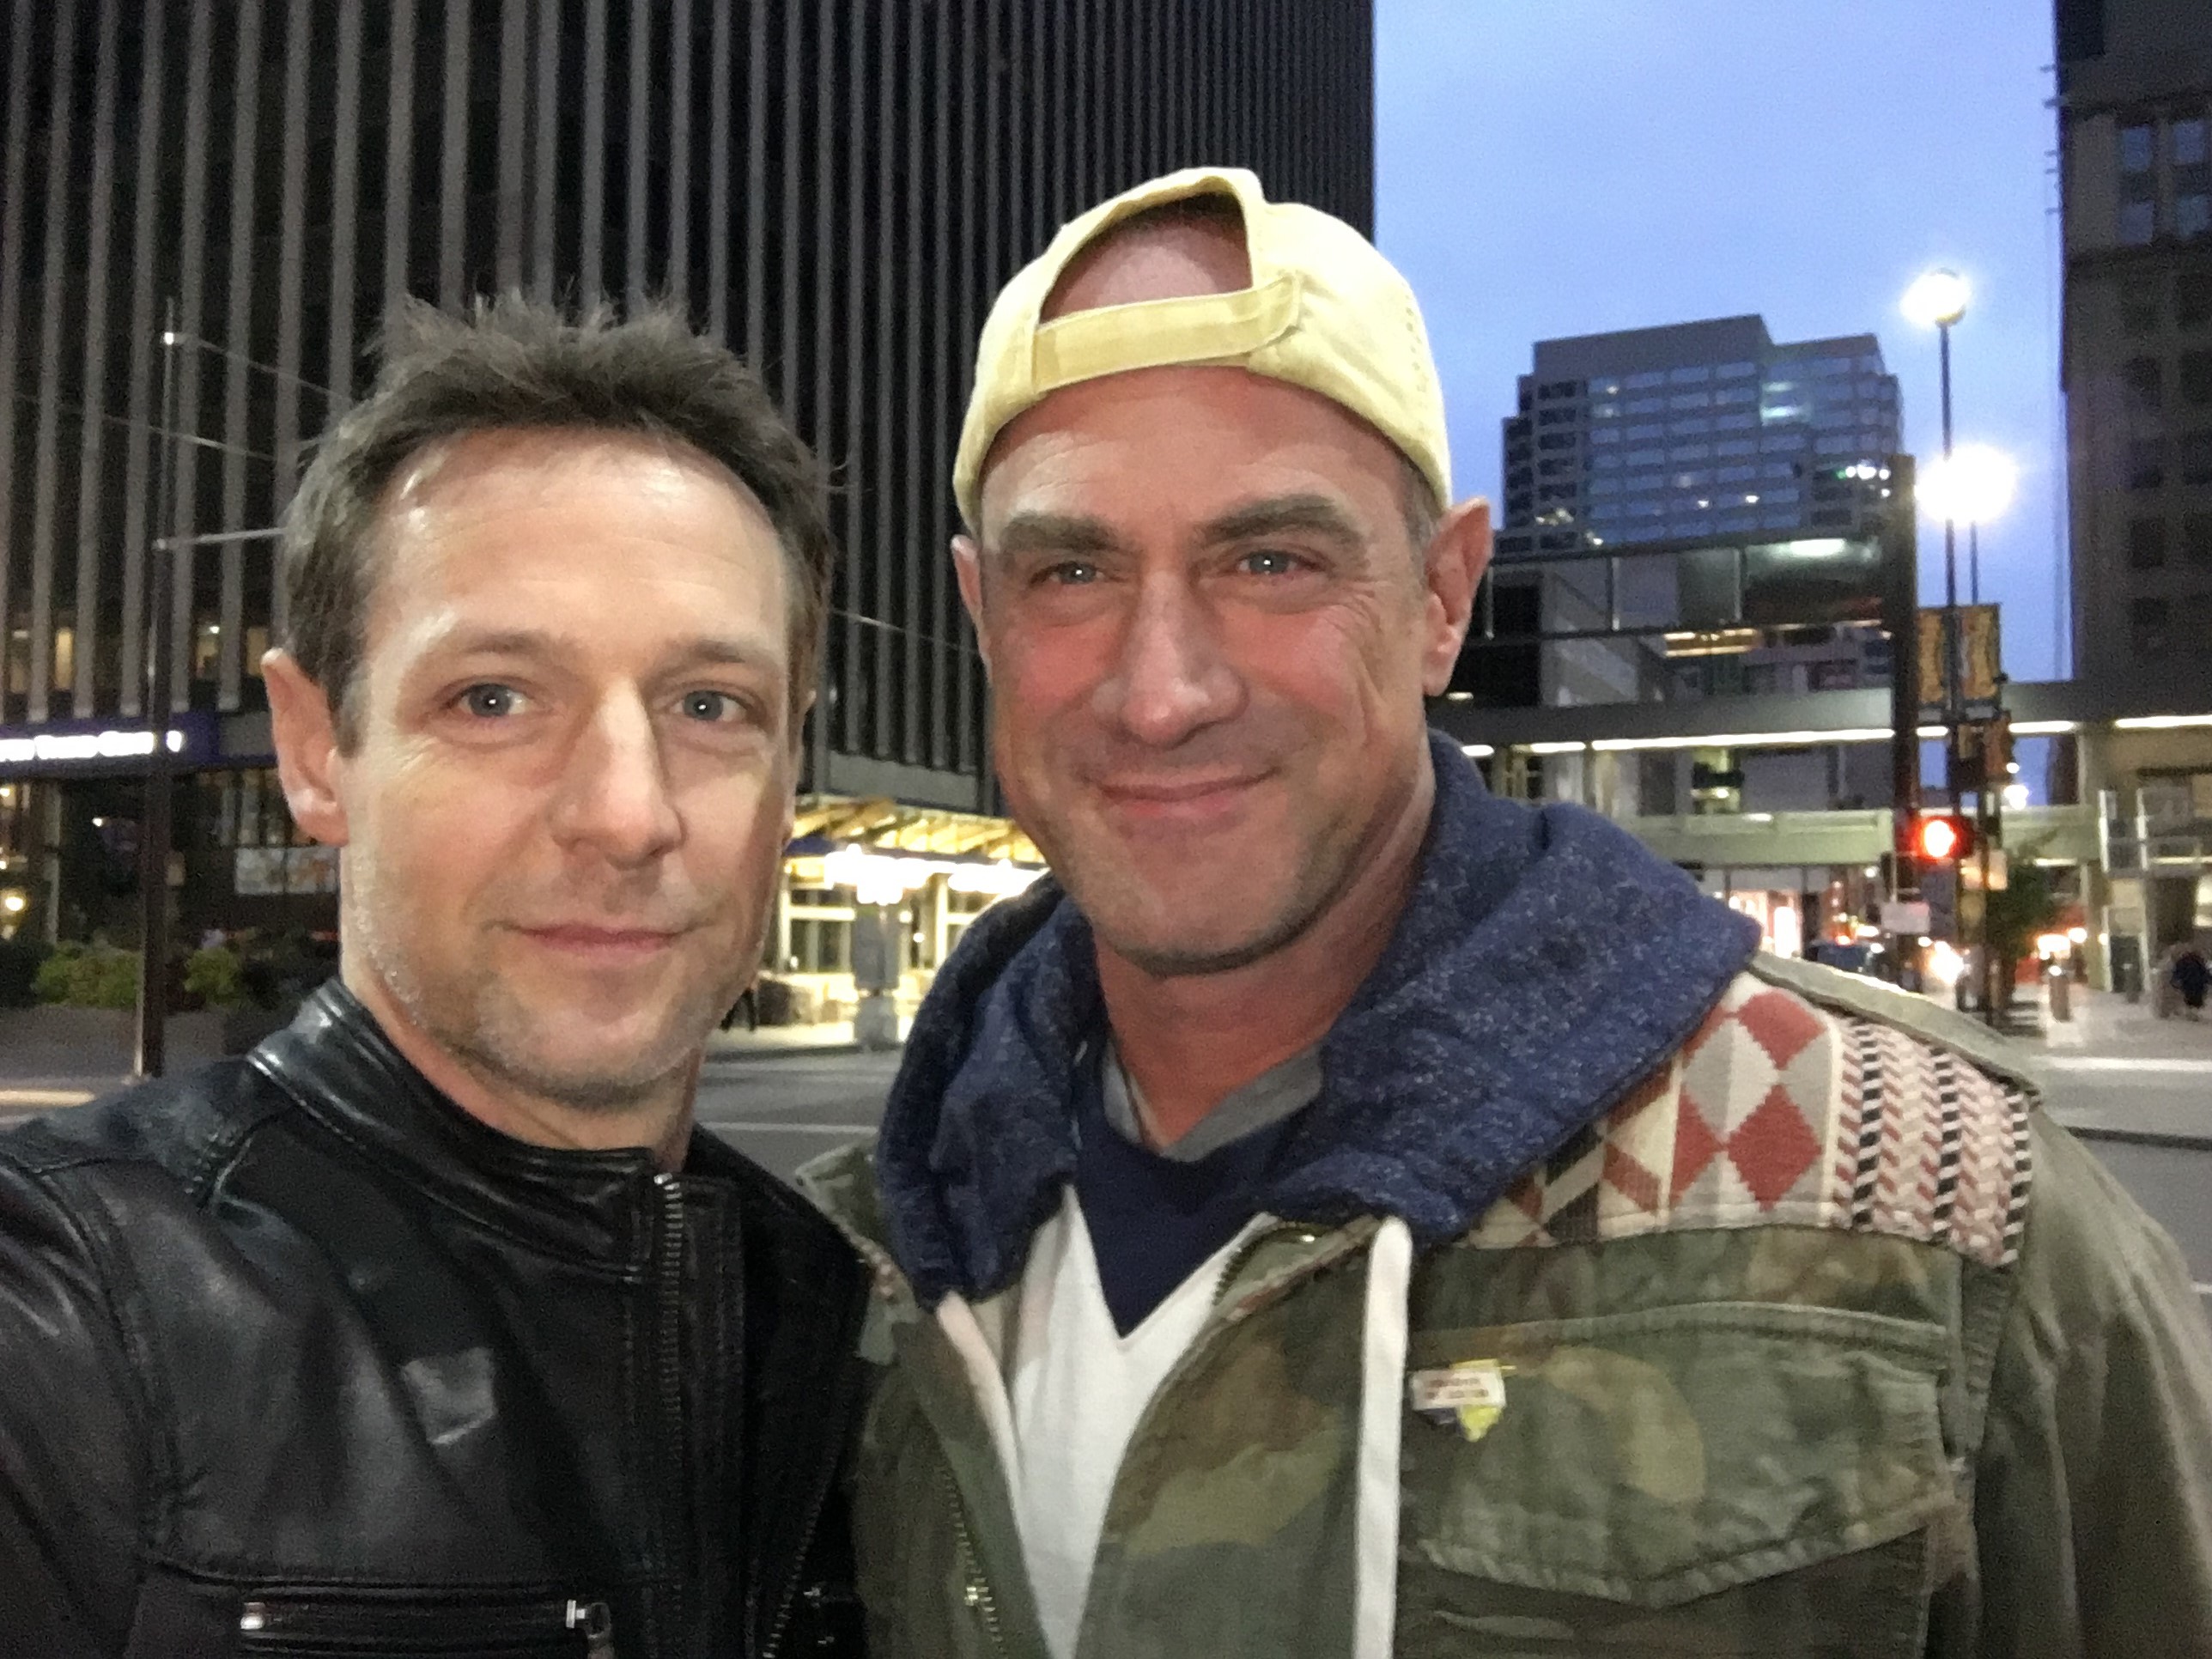 Chritopher Rob Bowen with Christopher Meloni, downtown Cincinnati during filming of Marauders.